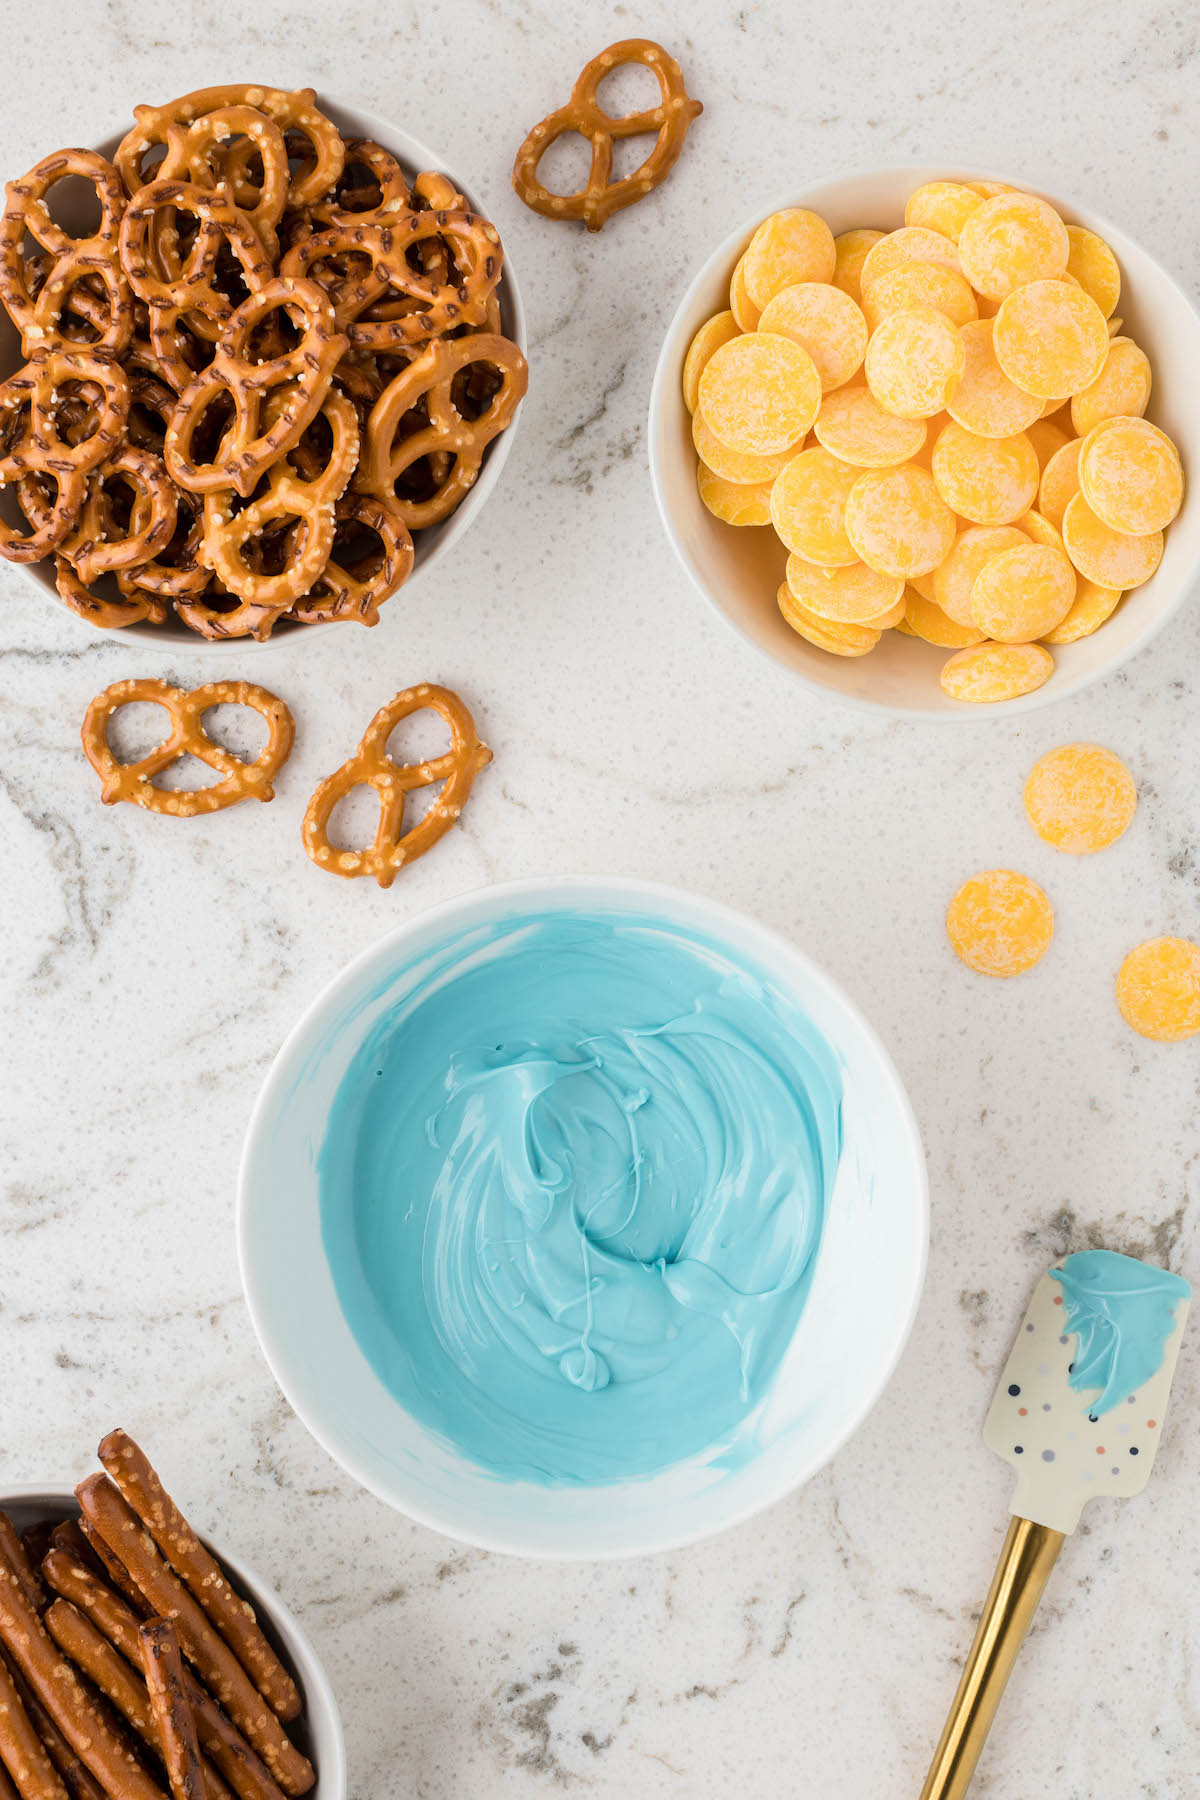 melted blue chocolate, yellow chocolate melts and pretzels set out to prepare butterfly pretzels.